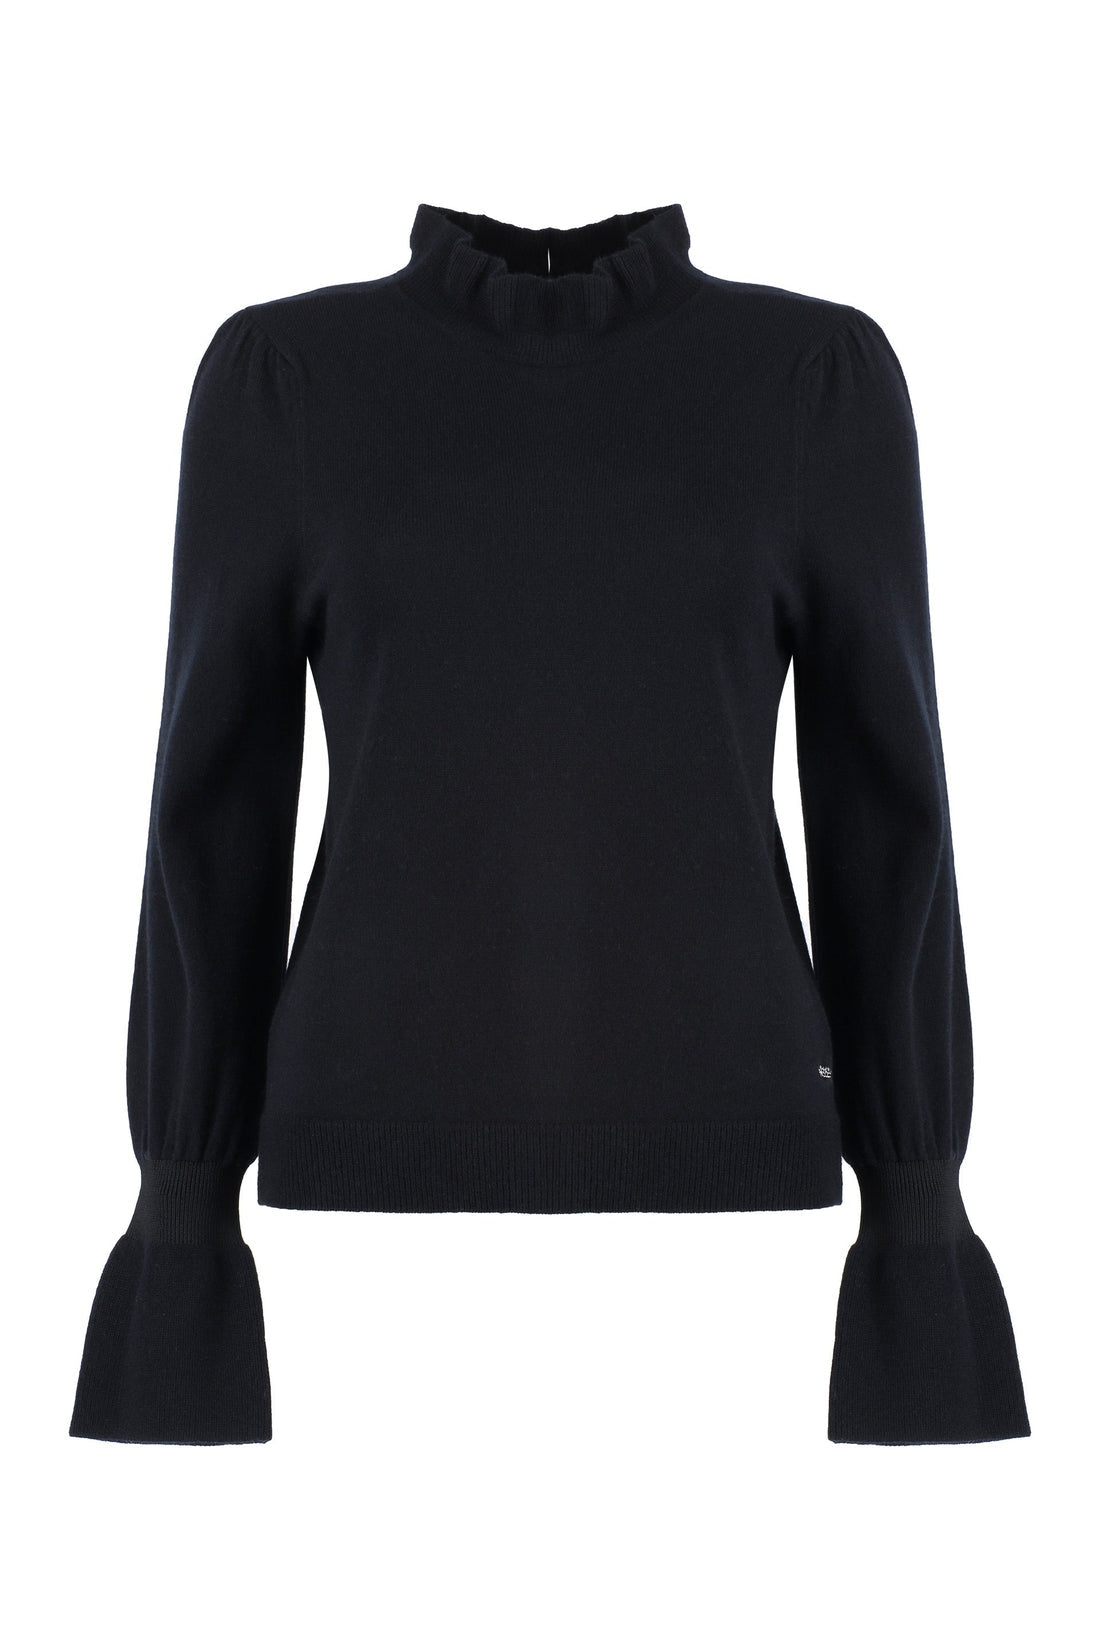 BOSS-OUTLET-SALE-Ribbed cashmere and wool sweater-ARCHIVIST